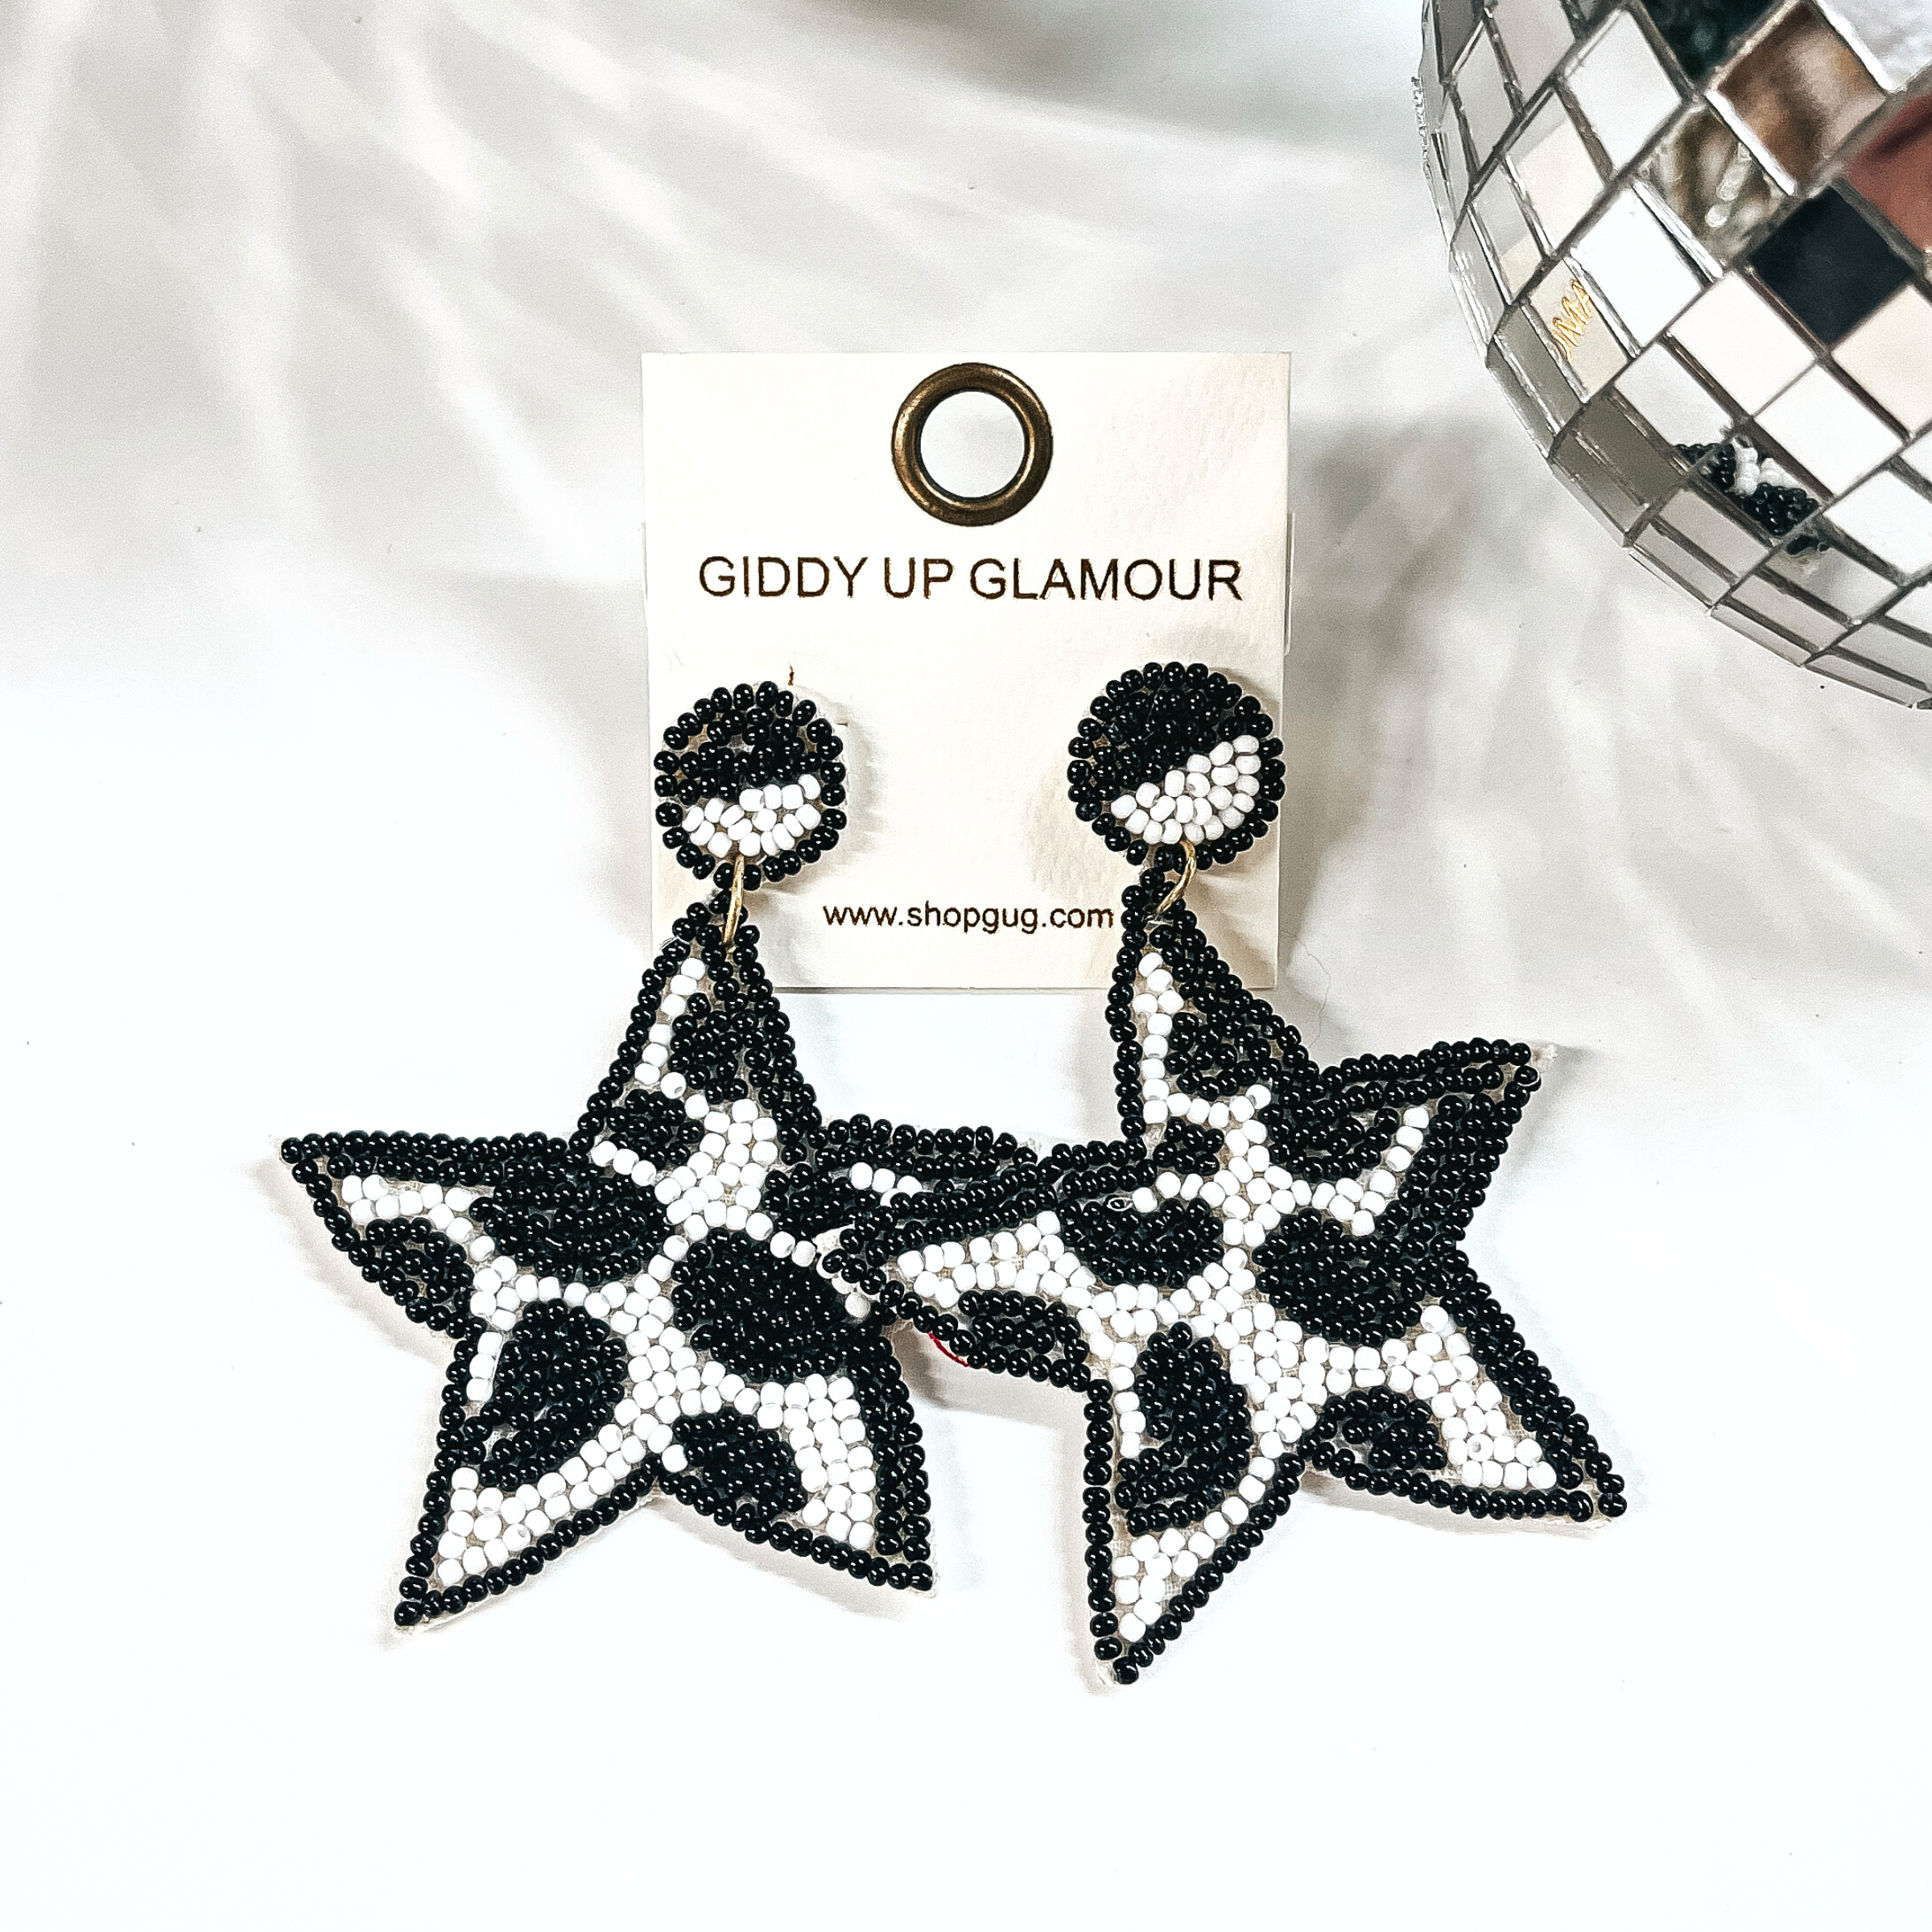 These are beaded star shape earrings in black and white. The center  is in black and white cow print, and black beads all around. The post  back is half black and white, with black beads all around as well. These  earrings are placed on an ivory Giddy Up Glamour earring card. These earrings  are taken on a white background with a disco ball in the side as decor.